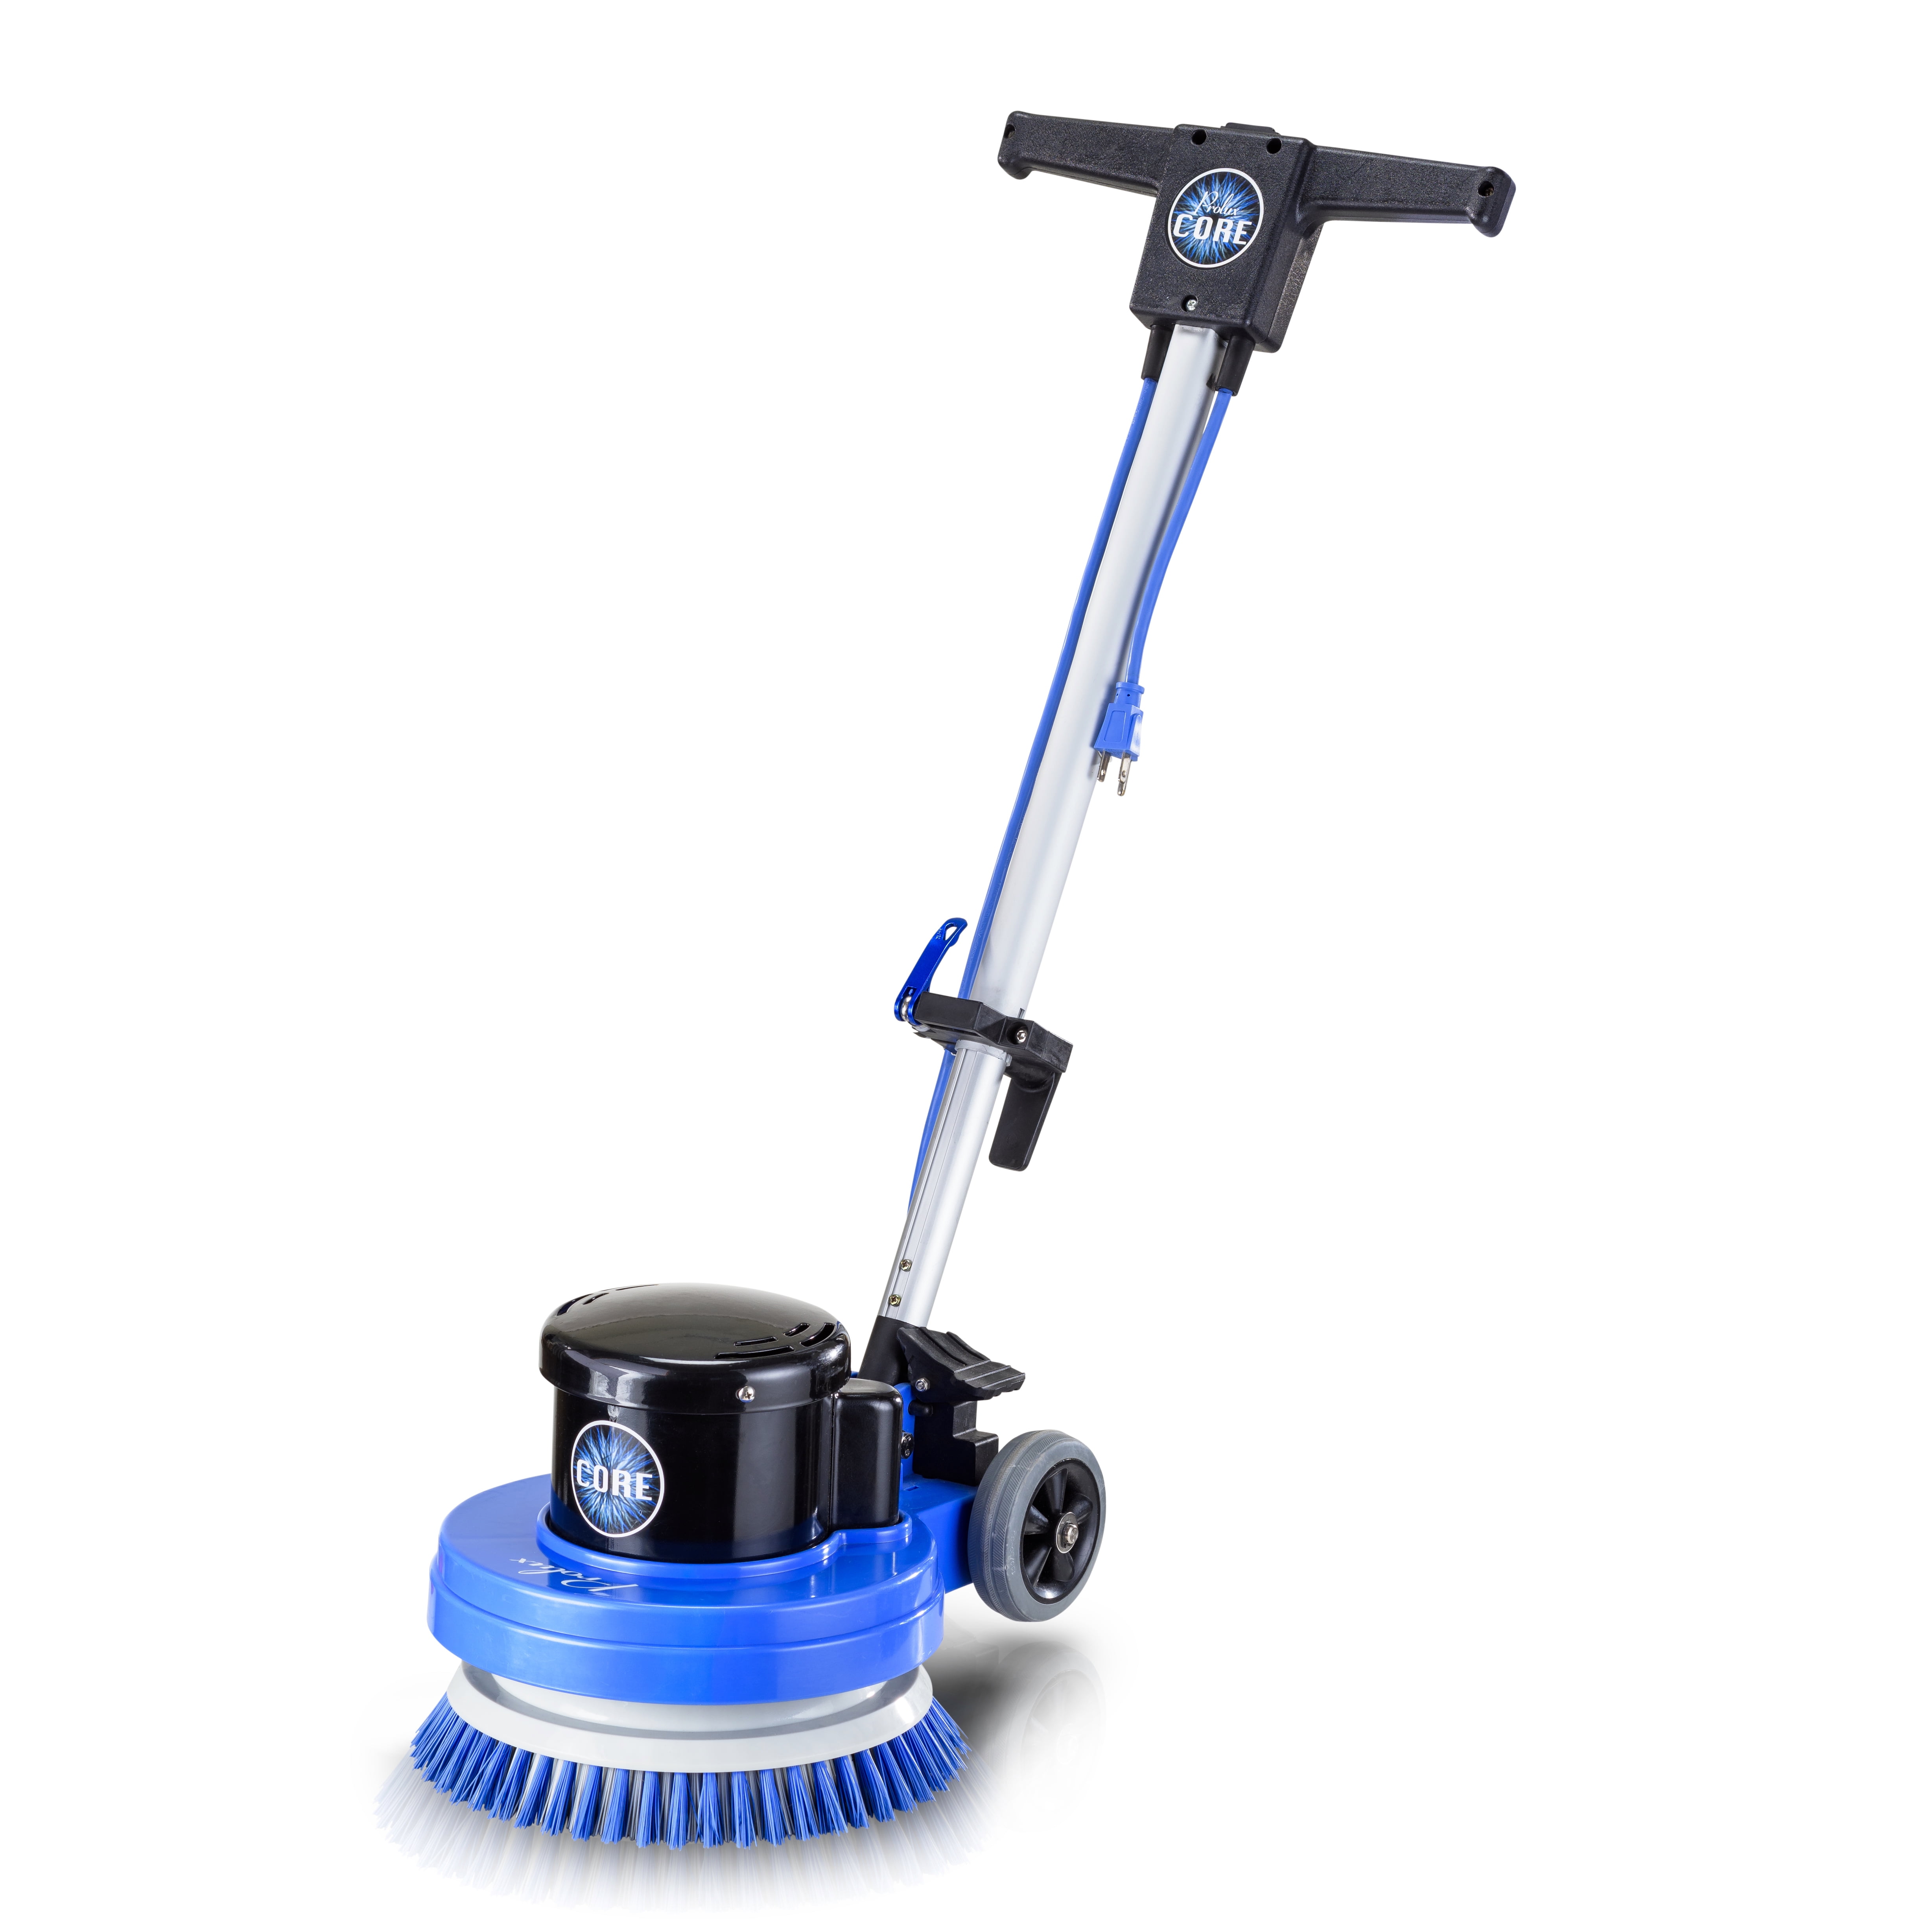 Rotary floor cleaner hire